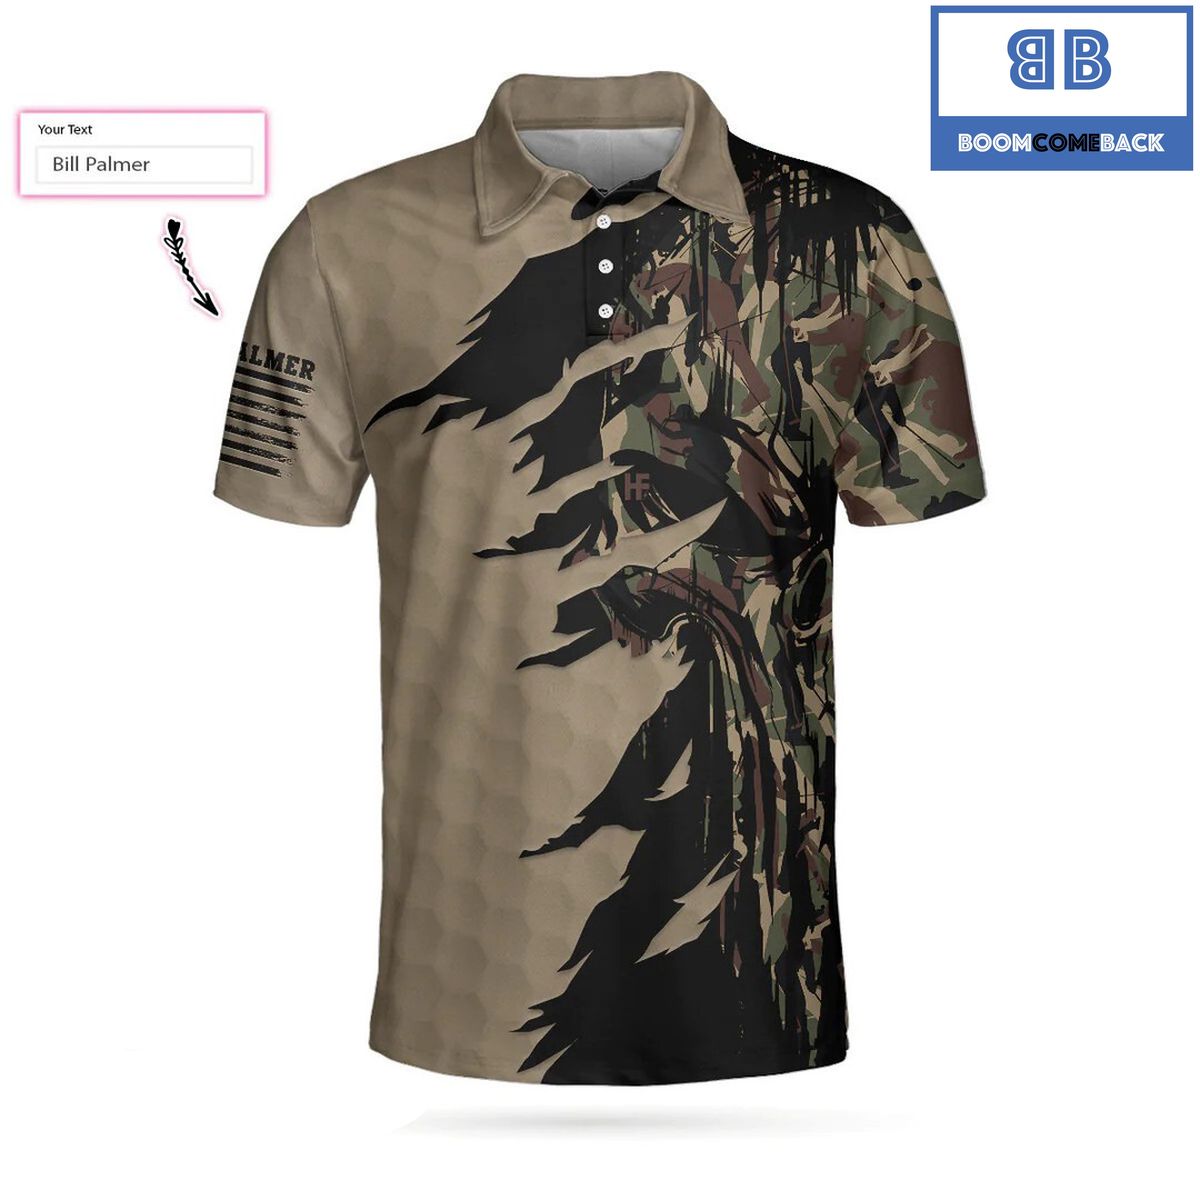 Personalized2BGolf2BRipped2BVintage2BGolfing2BClubs2BCamouflaged2BAthletic2BCollared2BMens2BPolo2BShirt2B1 f3sRo